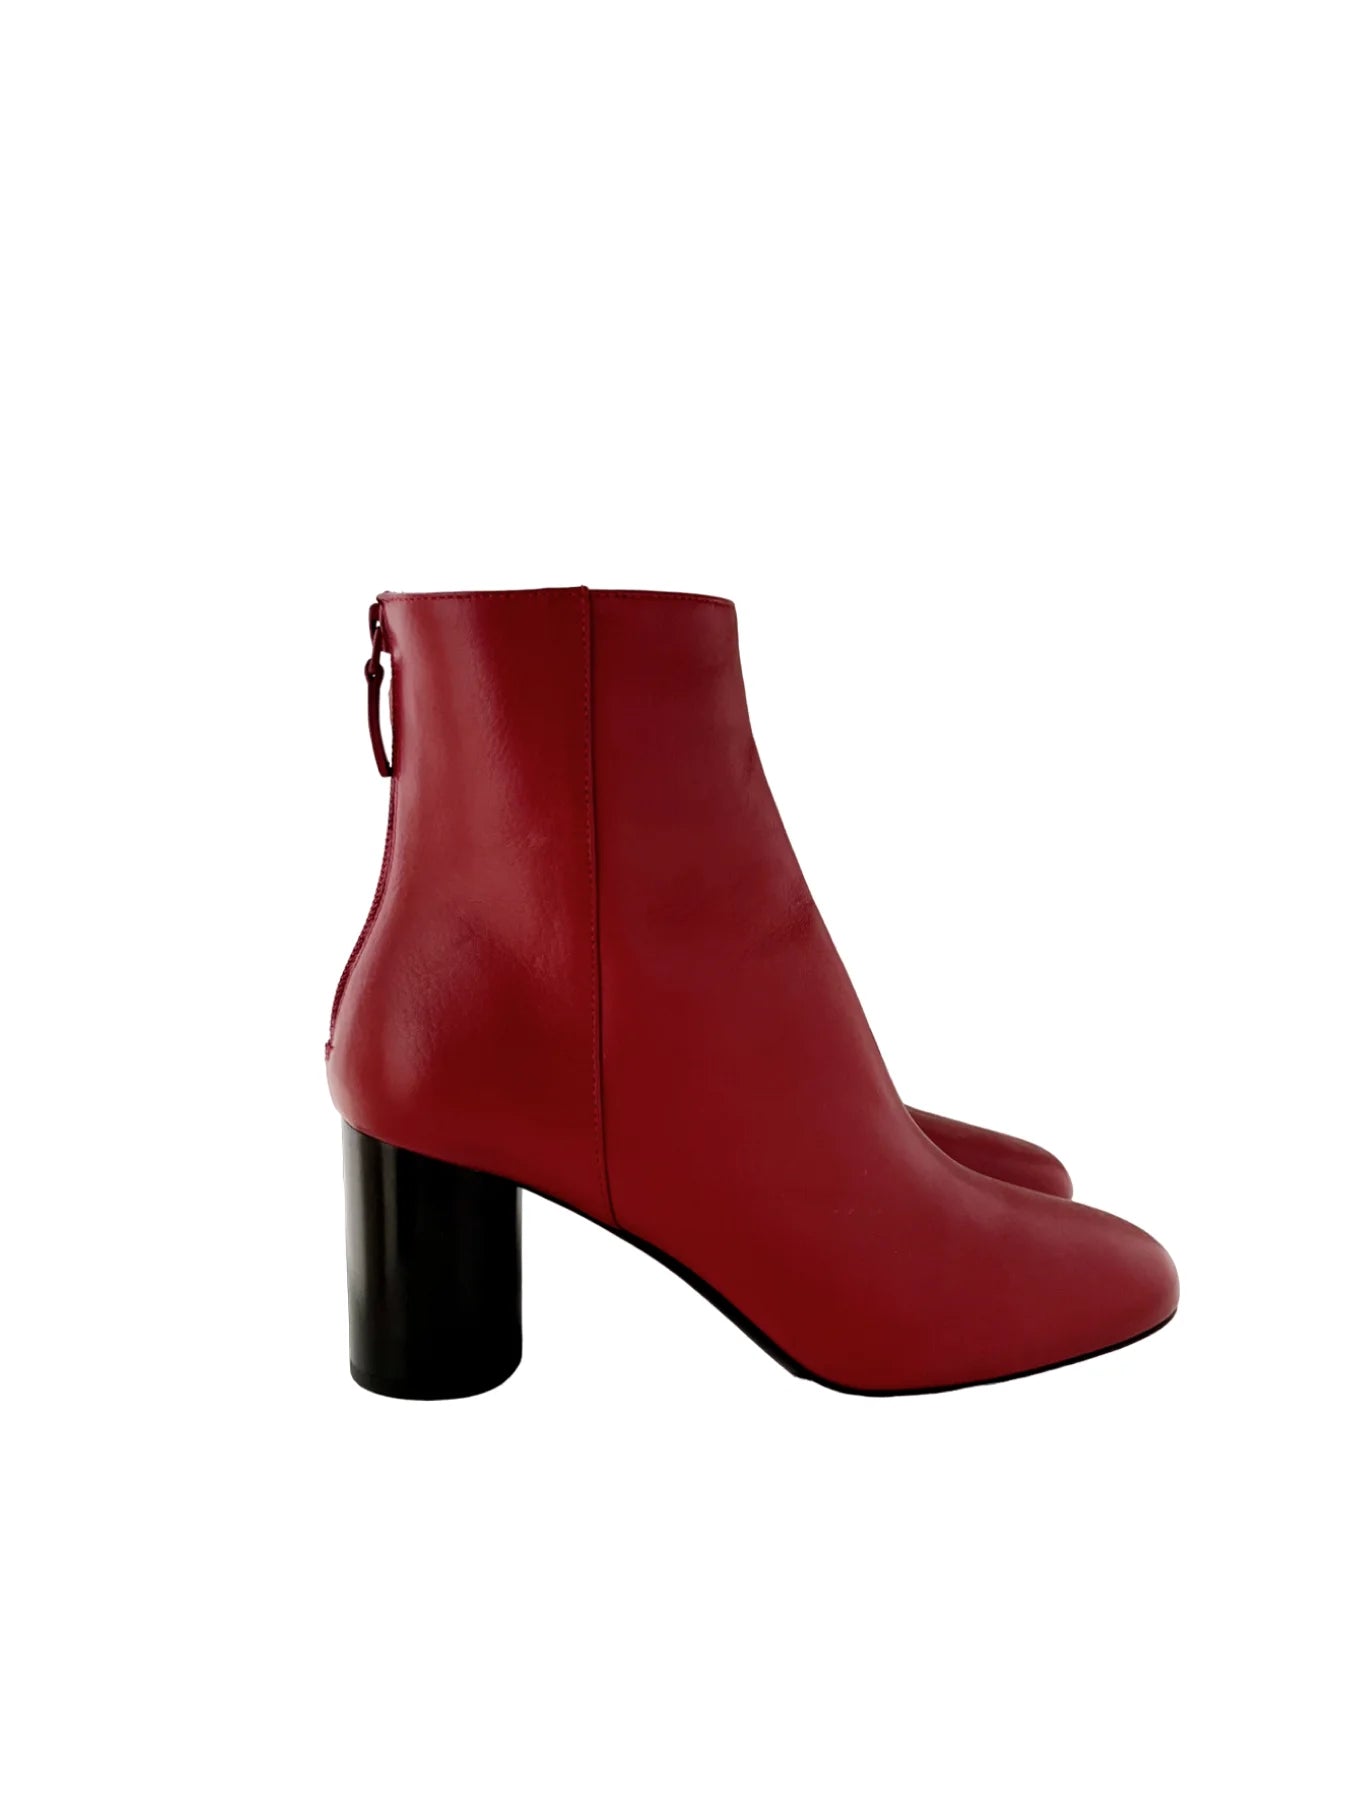 SANDRO Red Leather Booties, 39